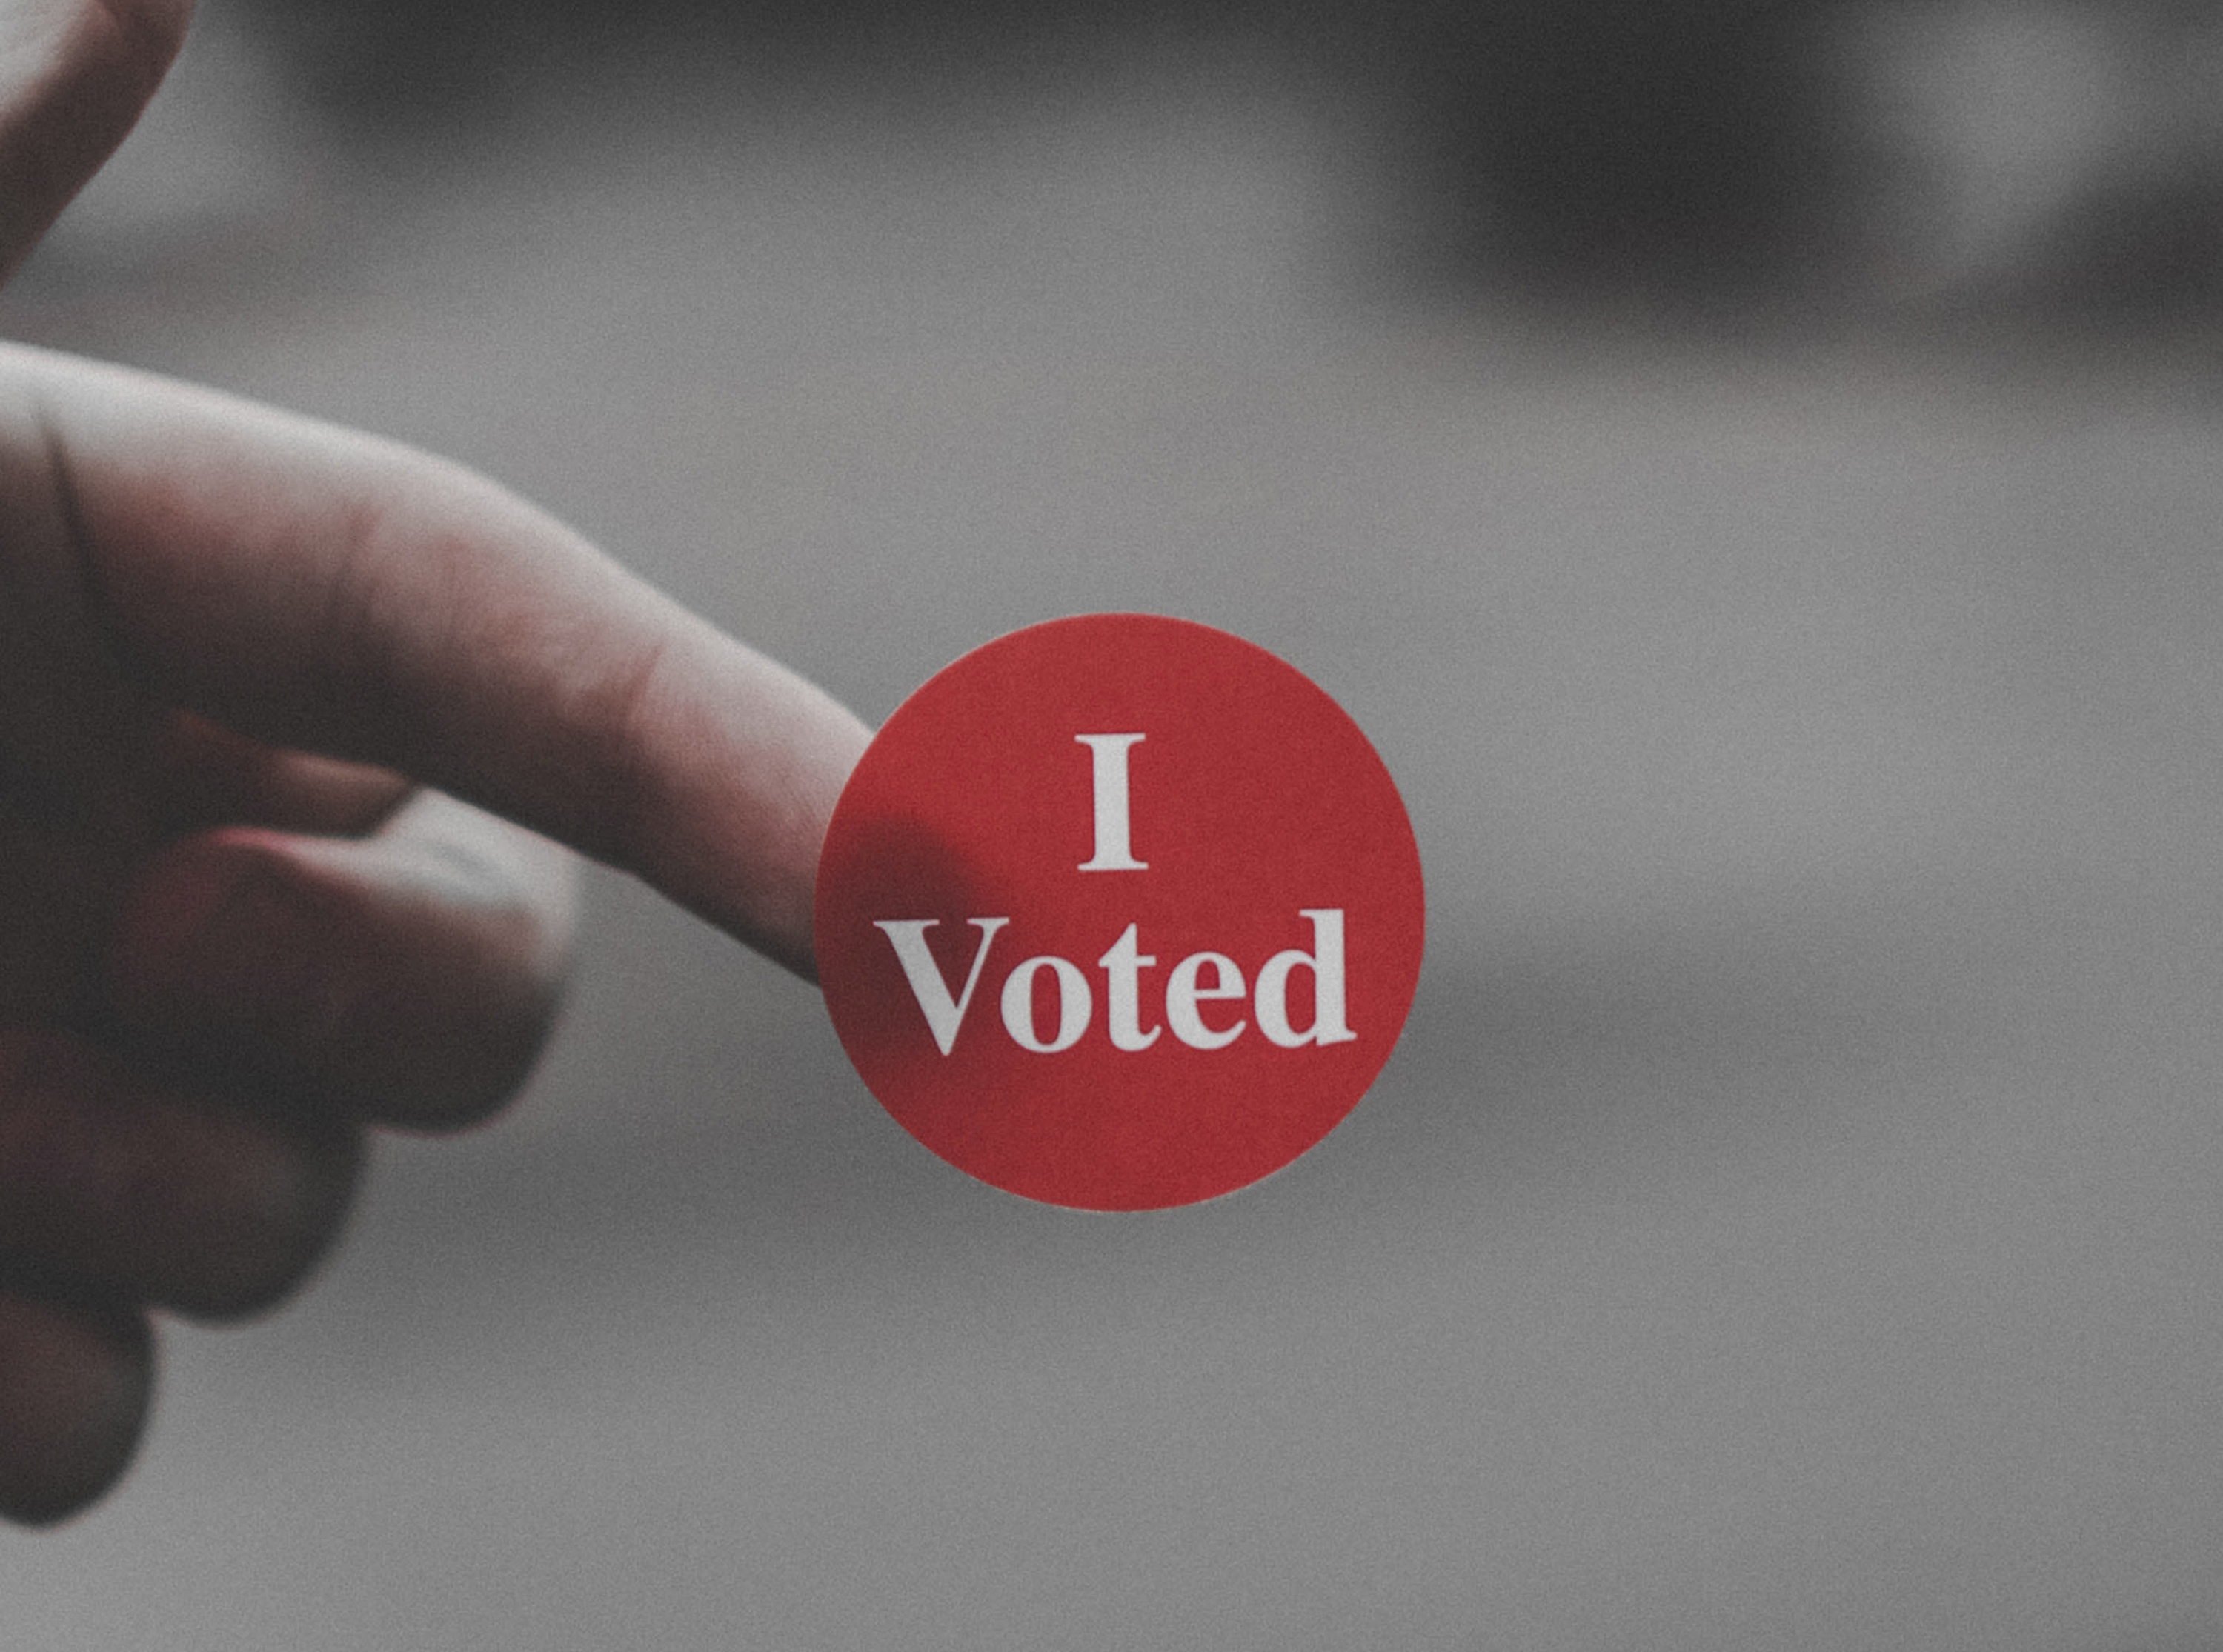 VVoting is one way to get your voice heard. Marcelo Goldmann lists 5 more ways to make a change. Photo by Parker Johnson on Unsplash.